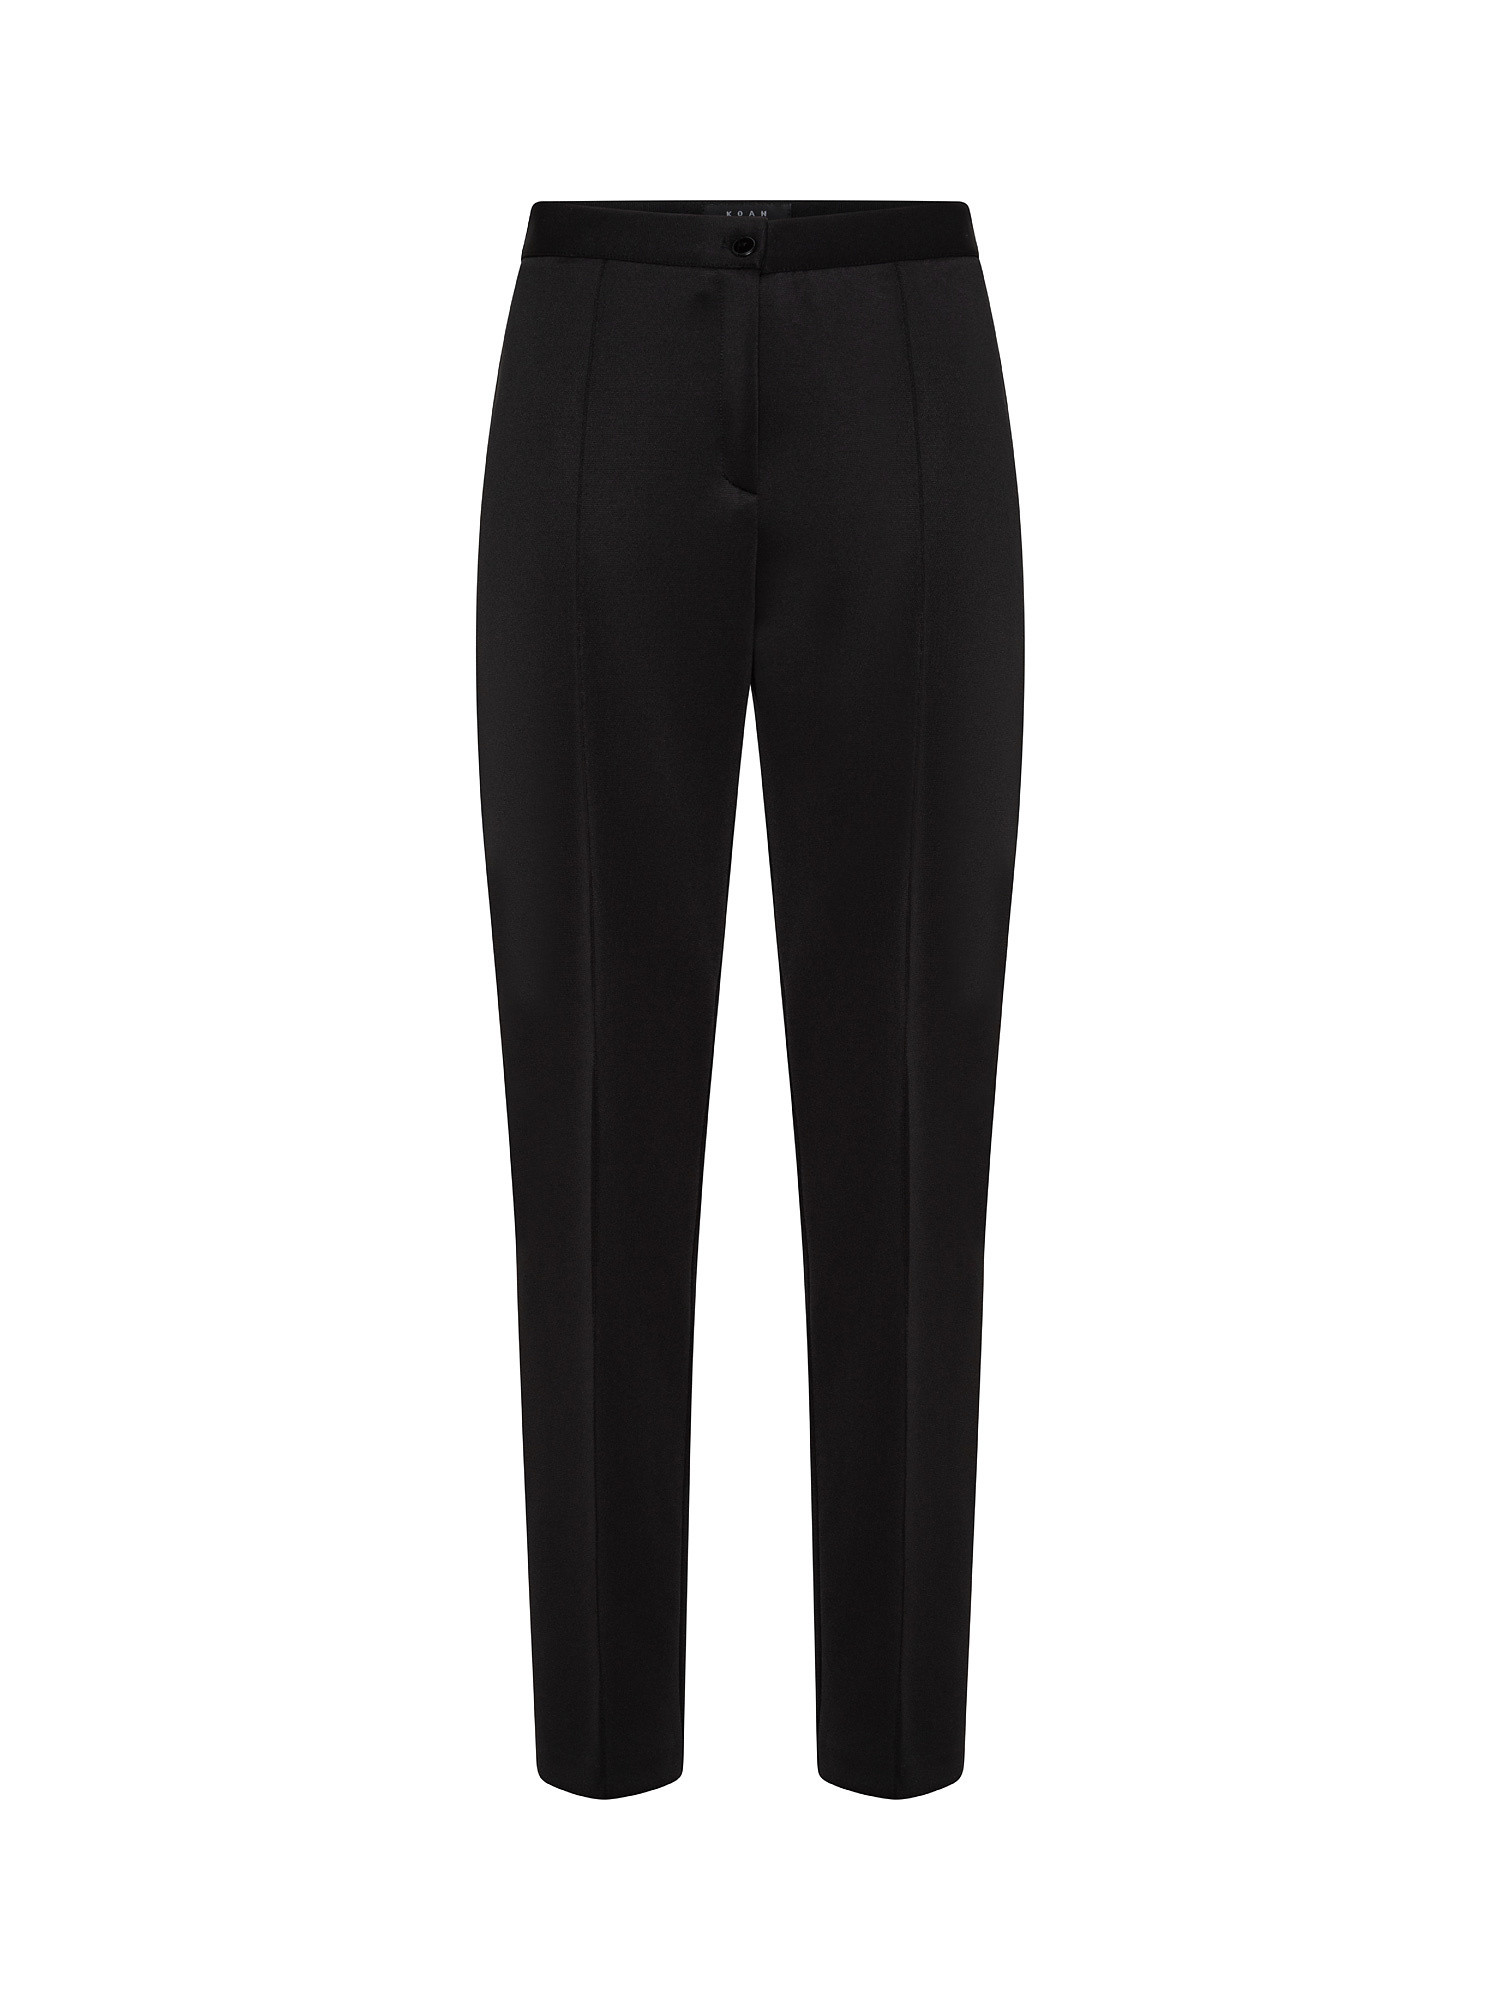 Trousers with crease, Black, large image number 0